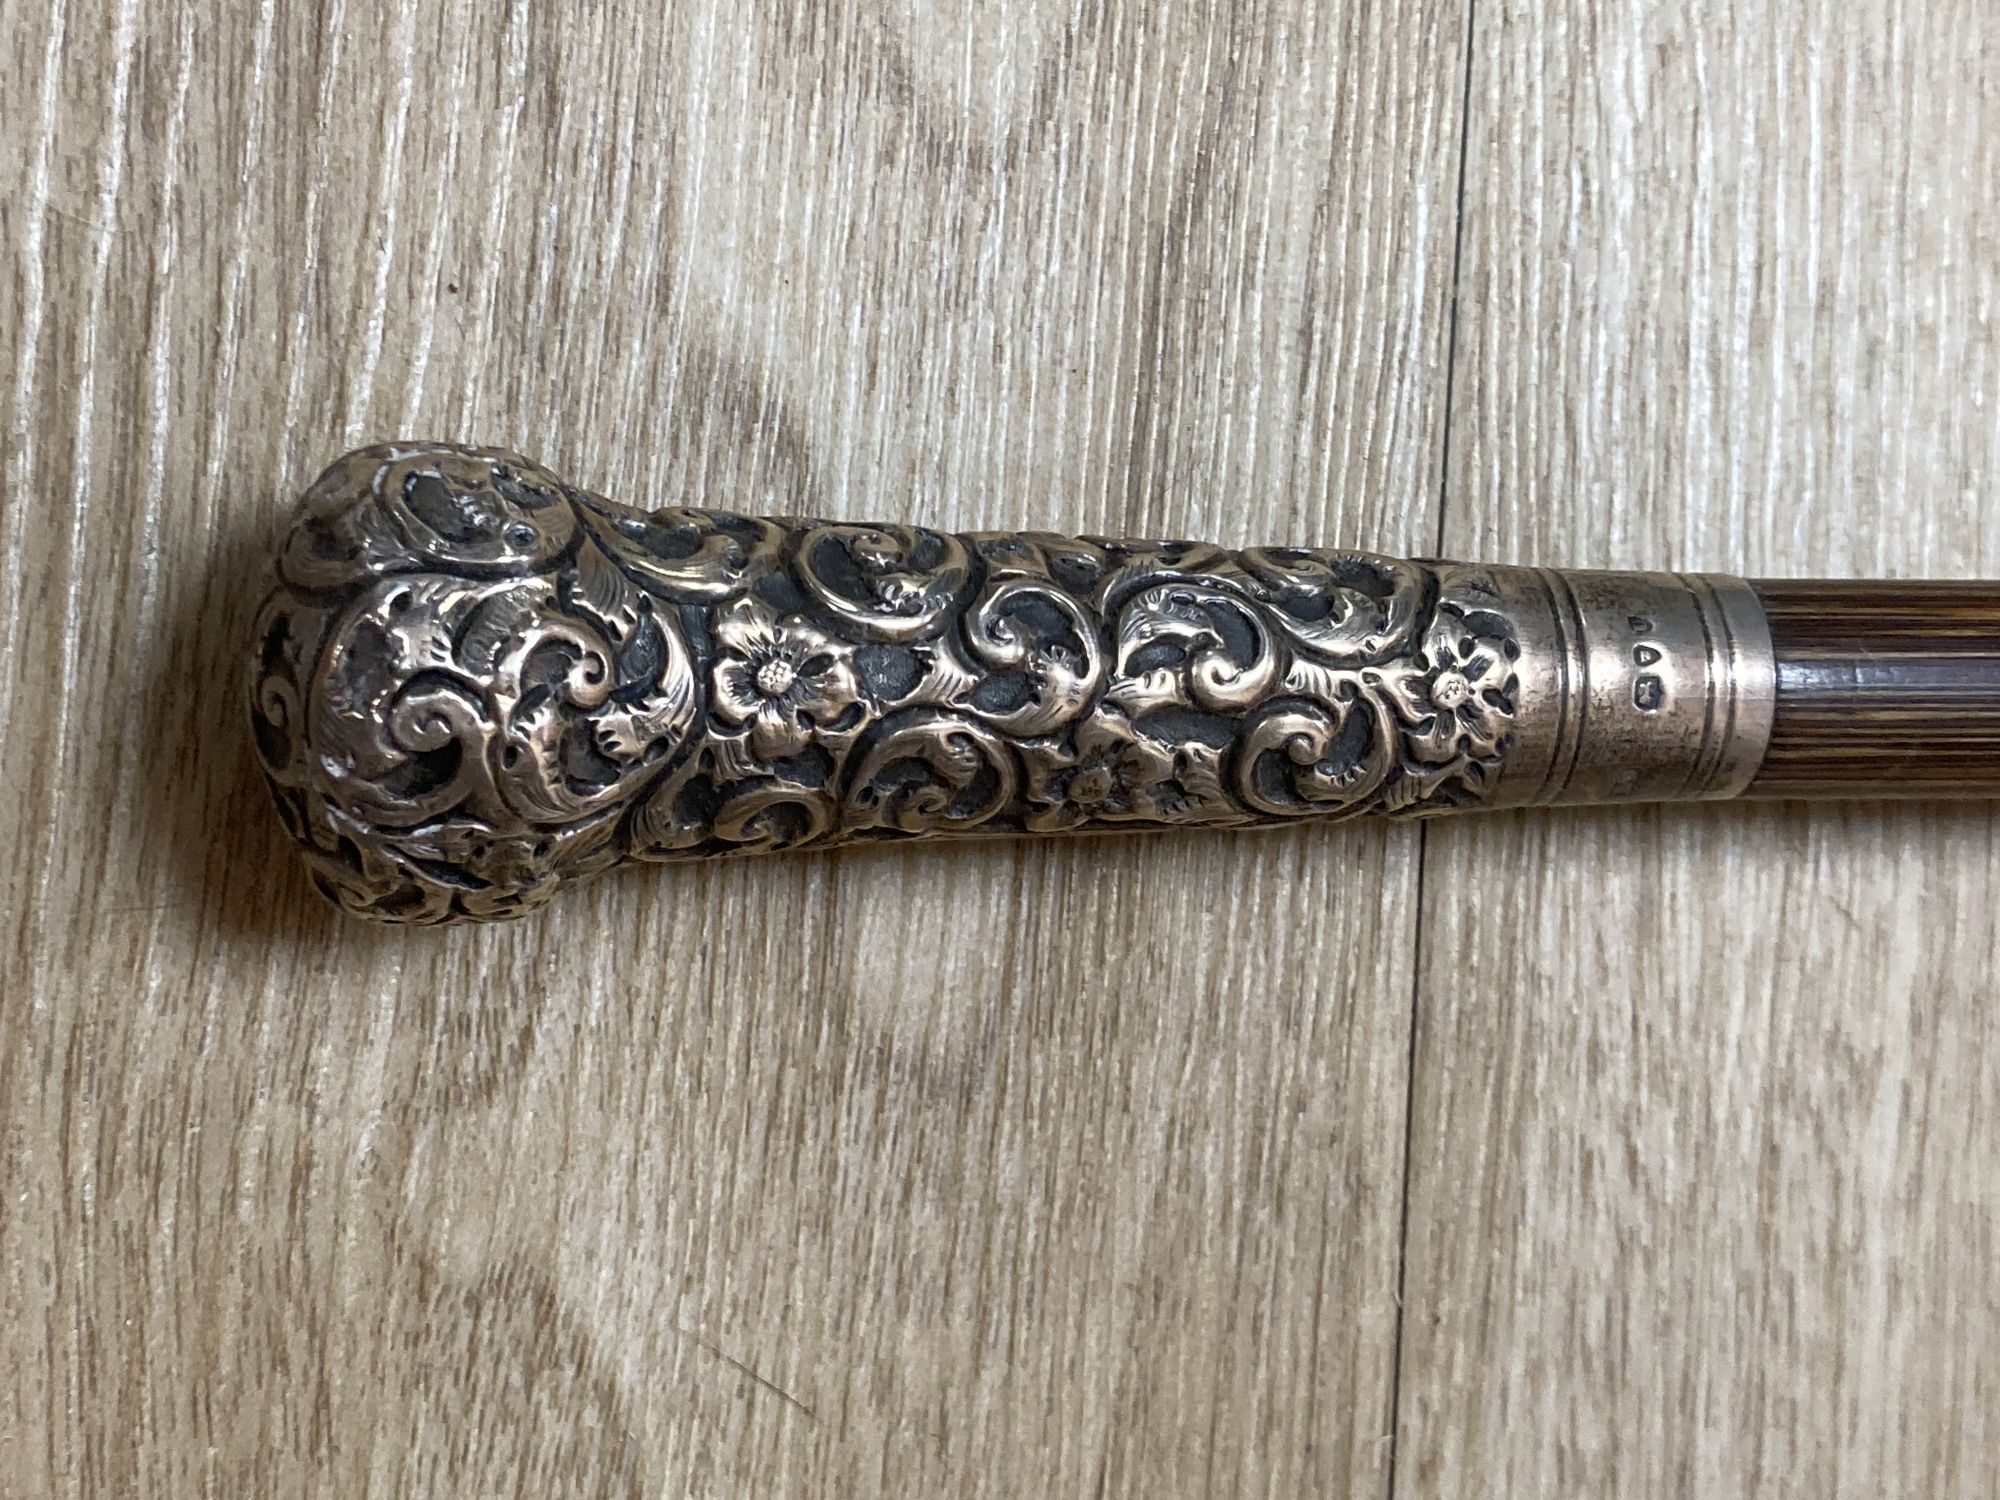 An Indian silver mounted walking cane, 91cm, and a silver mounted umbrella